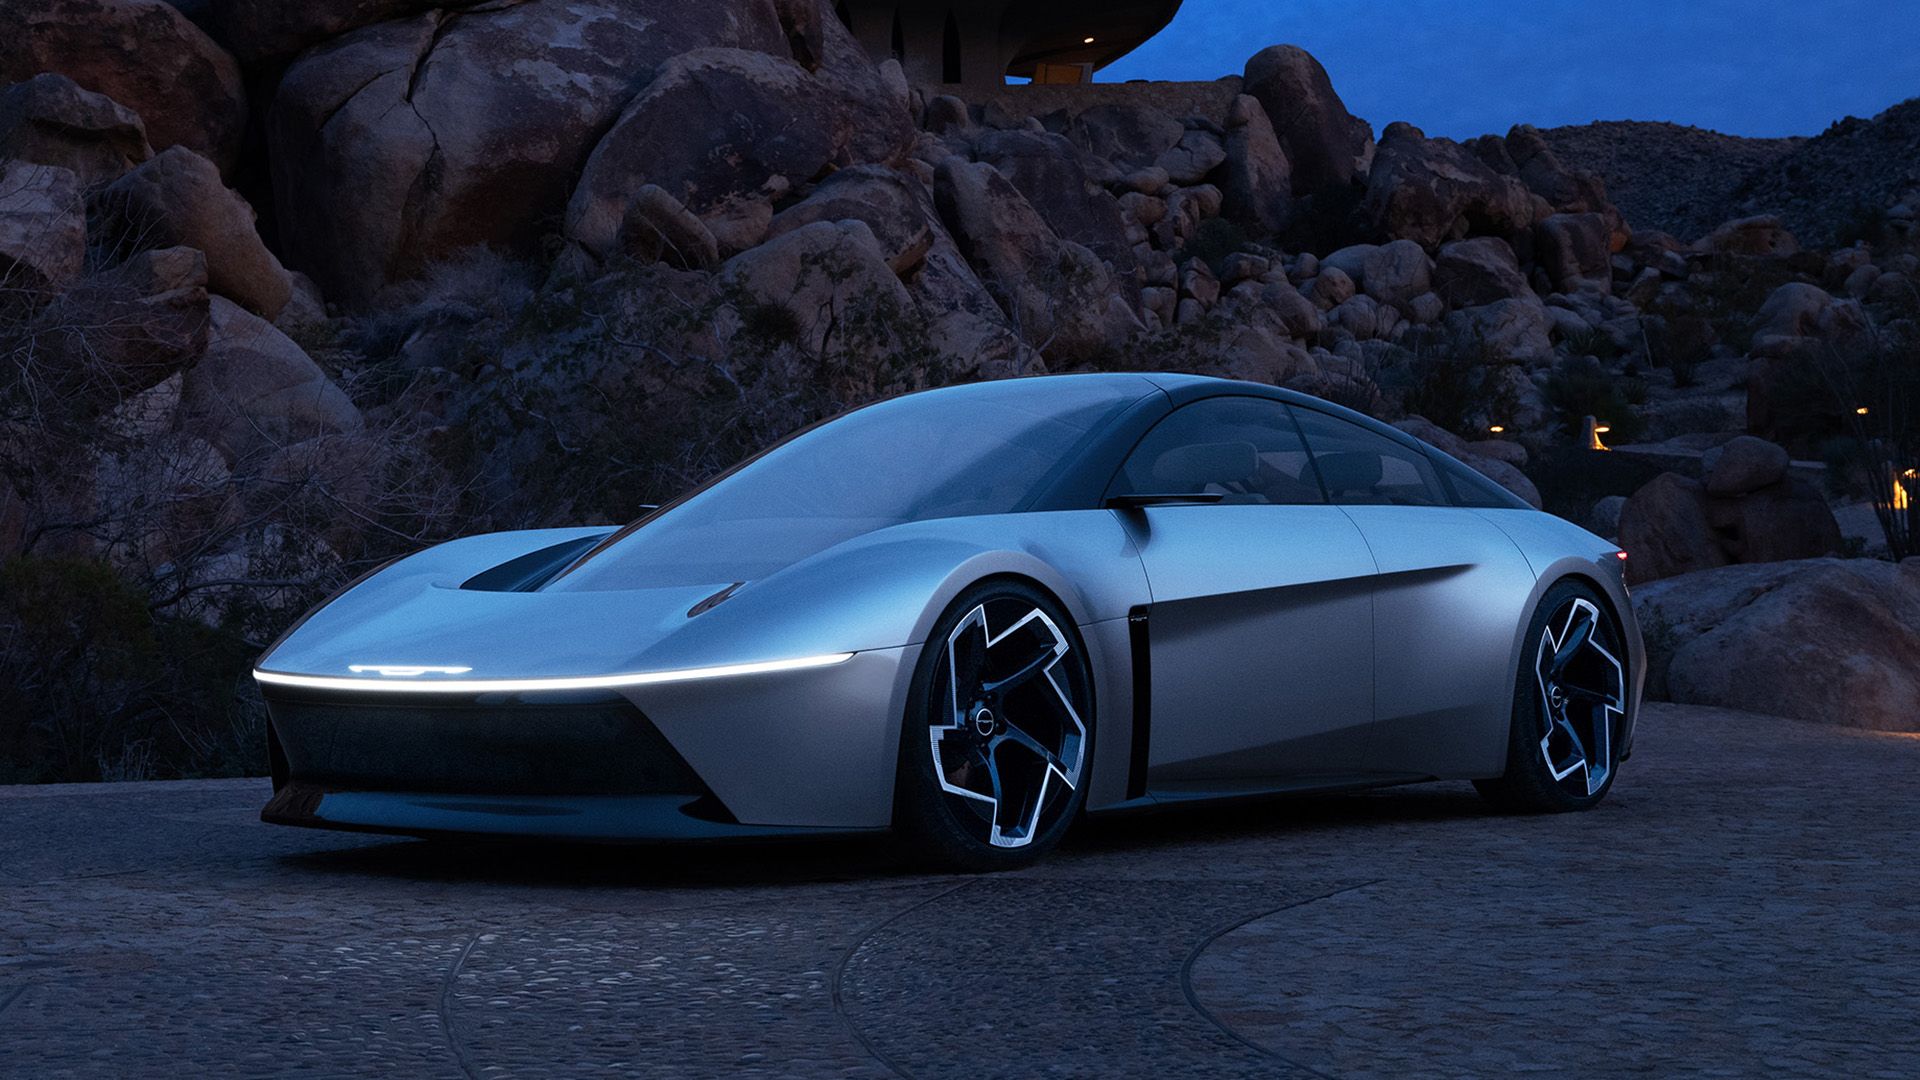 Chrysler Halcyon Concept full exterior view